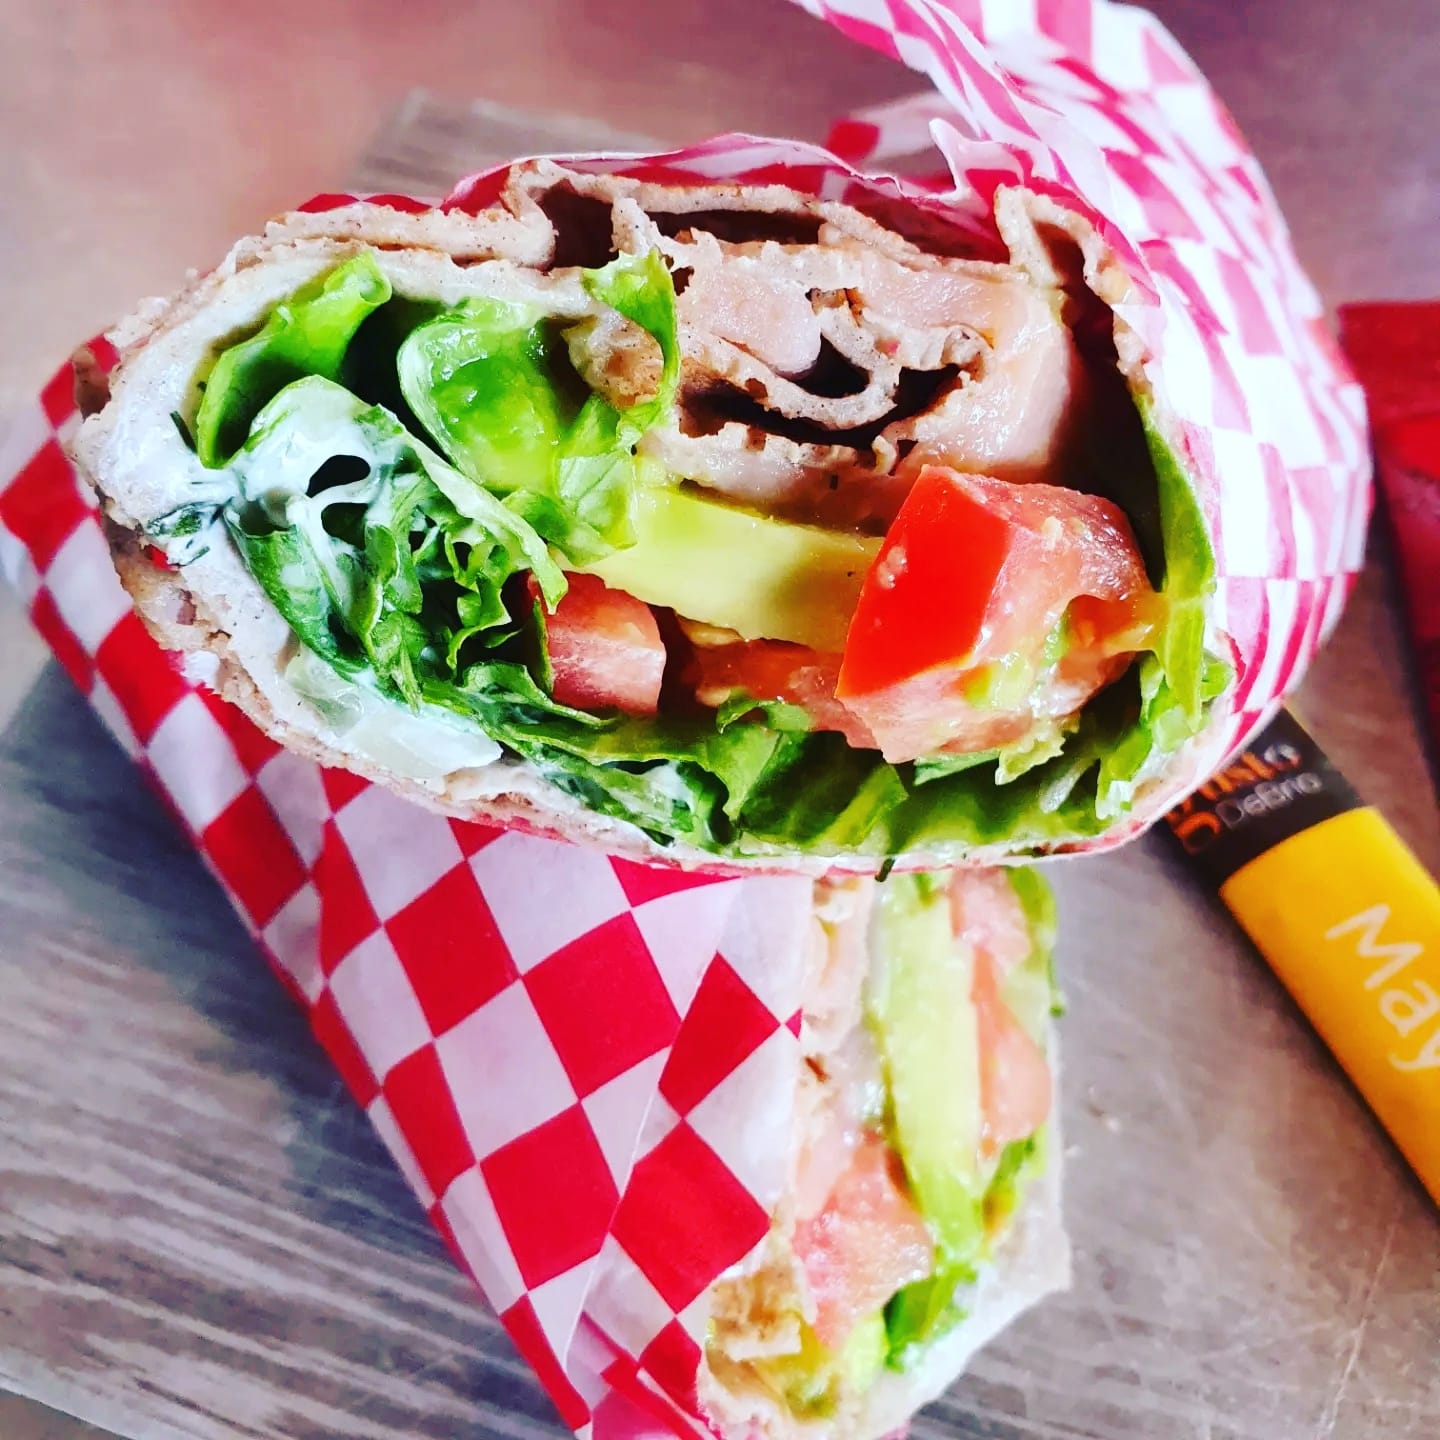 Wrap Jambon Fromage